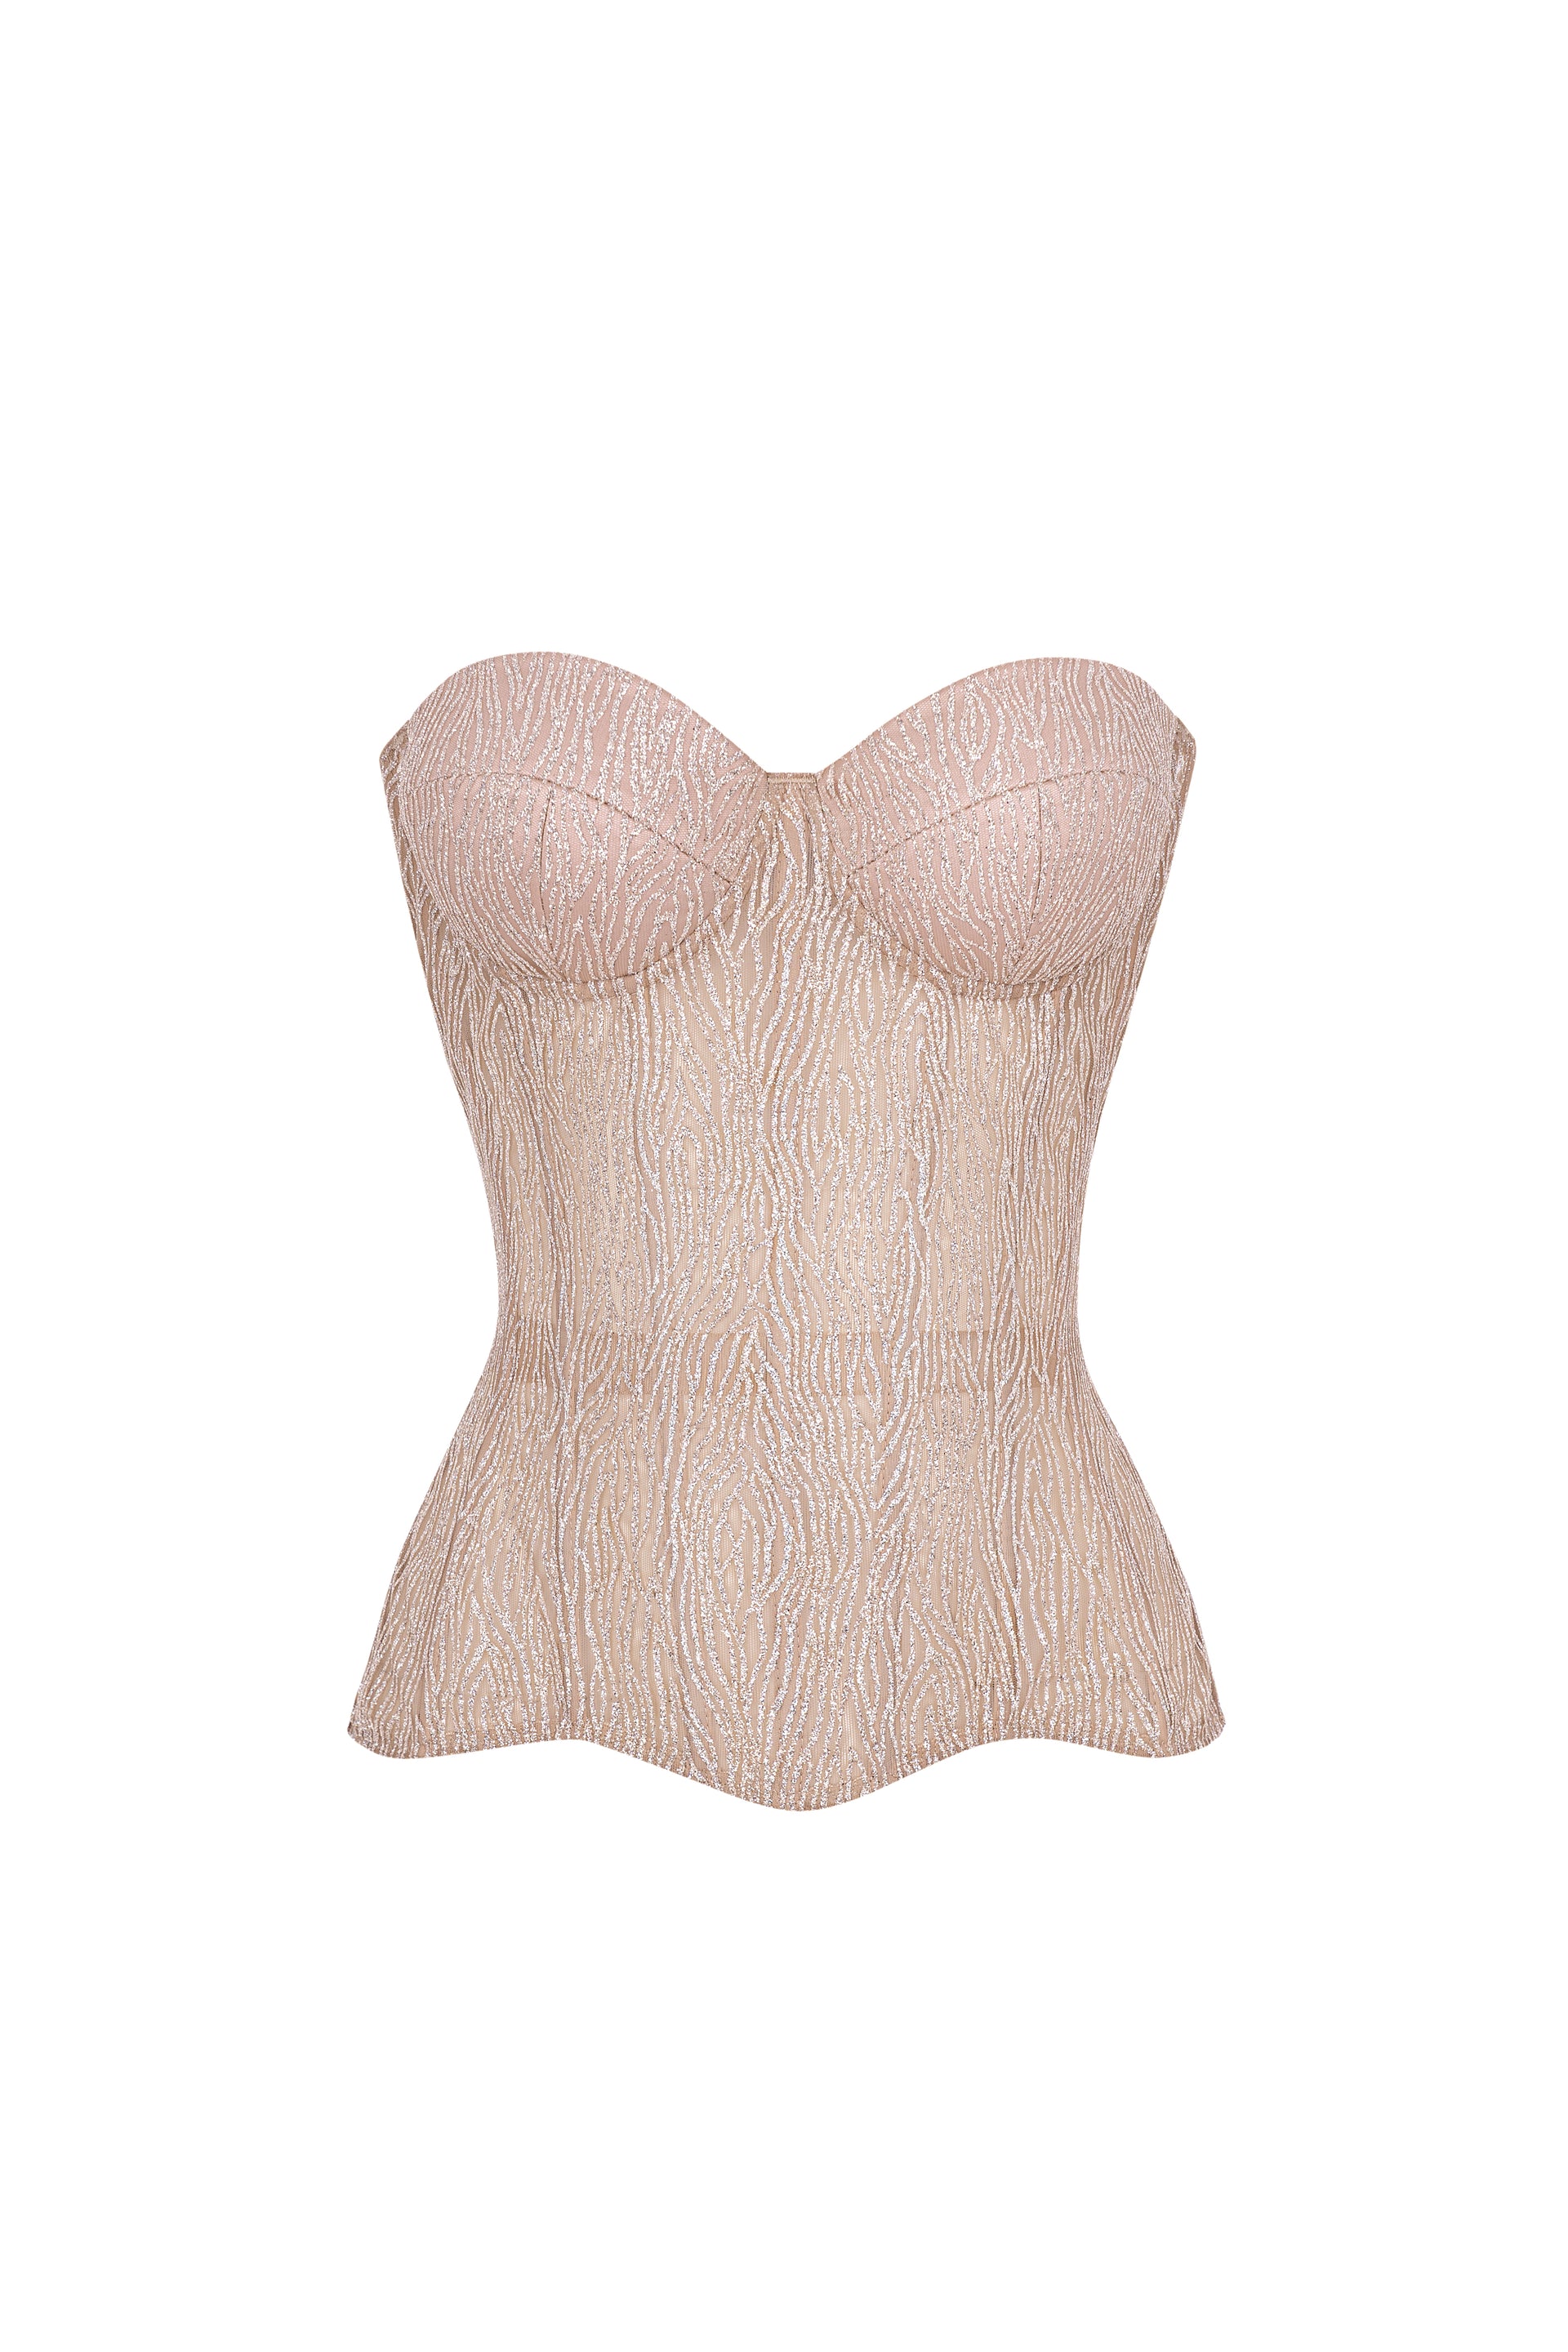 Shiny beige wave corset with cups